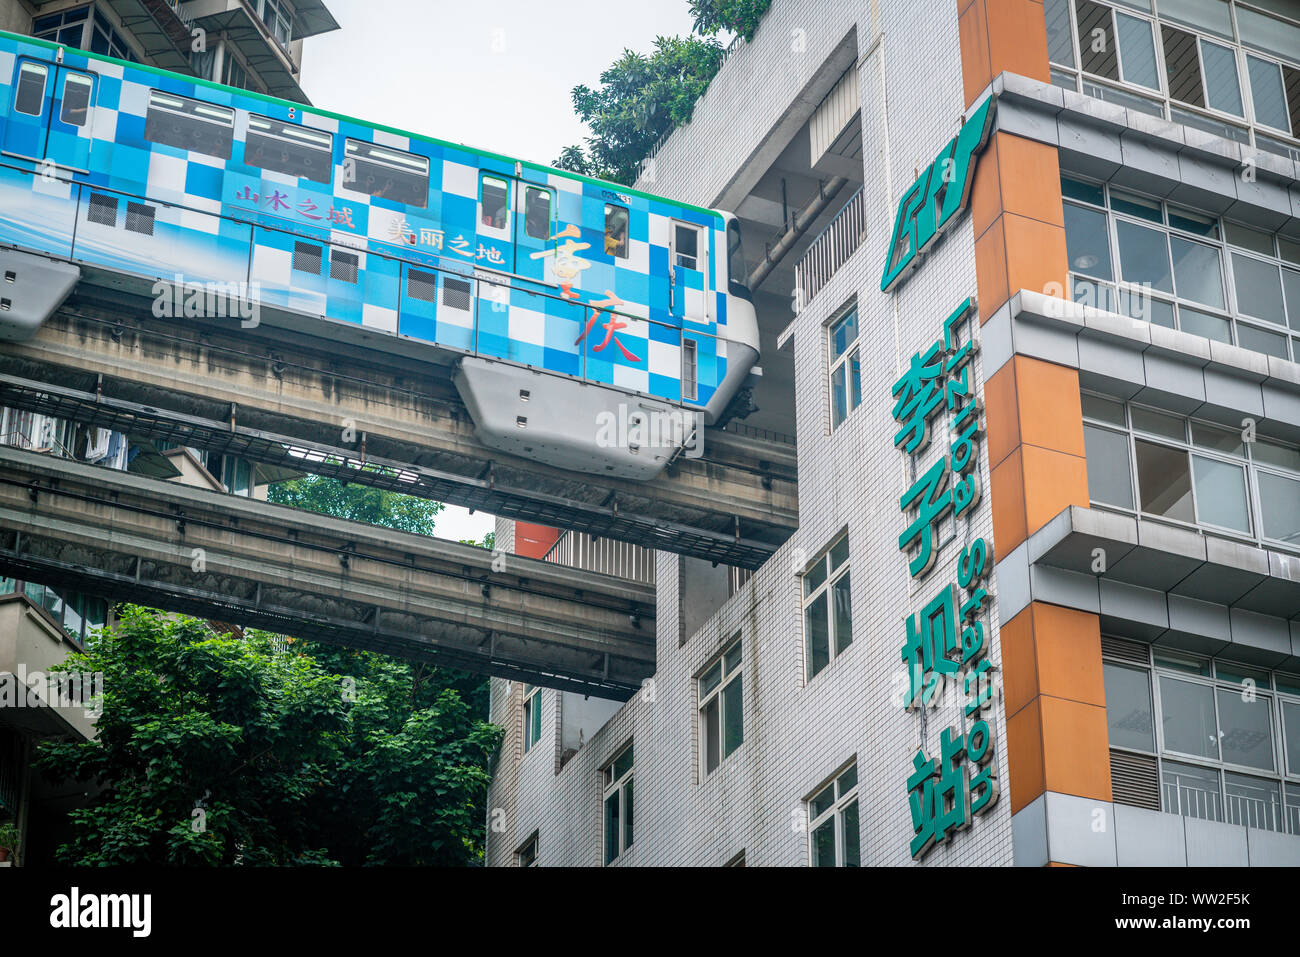 Chongqing China, 7 August 2019 : Close-up view of Chongqing metro train at Liziba station famous for being inside a residential building in Chongqing Stock Photo